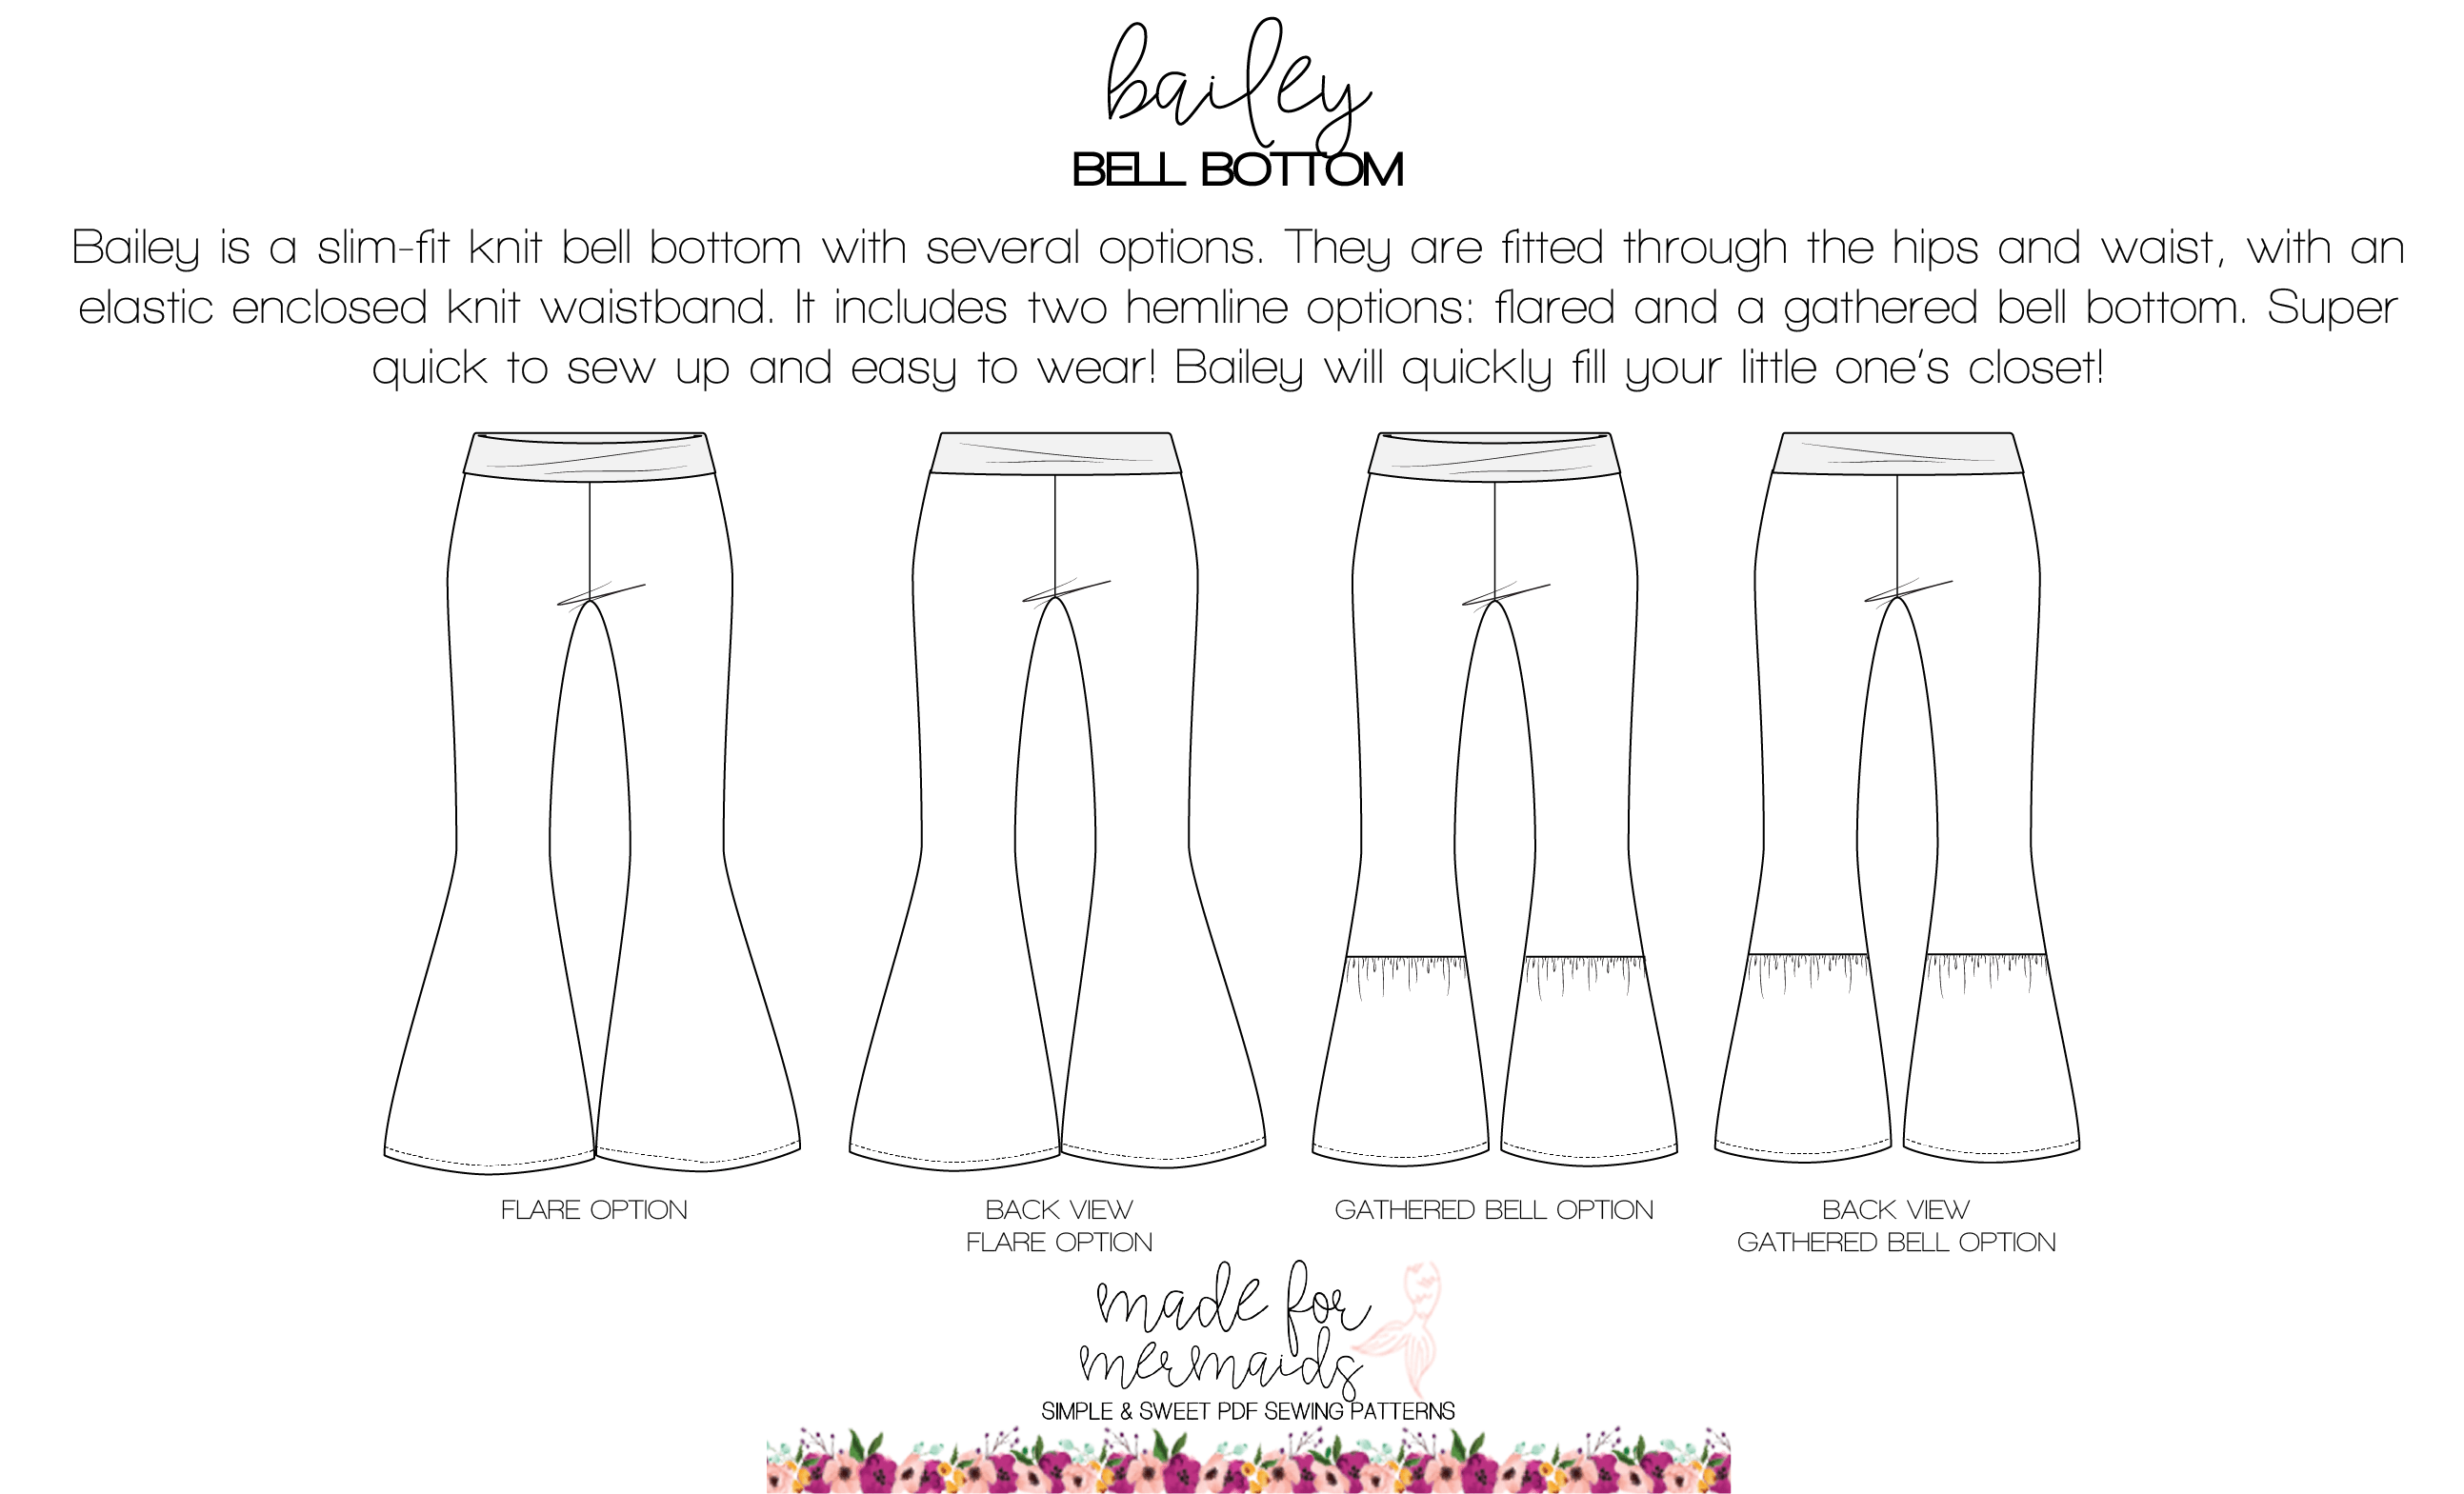 bell bottom trousers pattern  Sewing and Embroidery Studio  Facebook